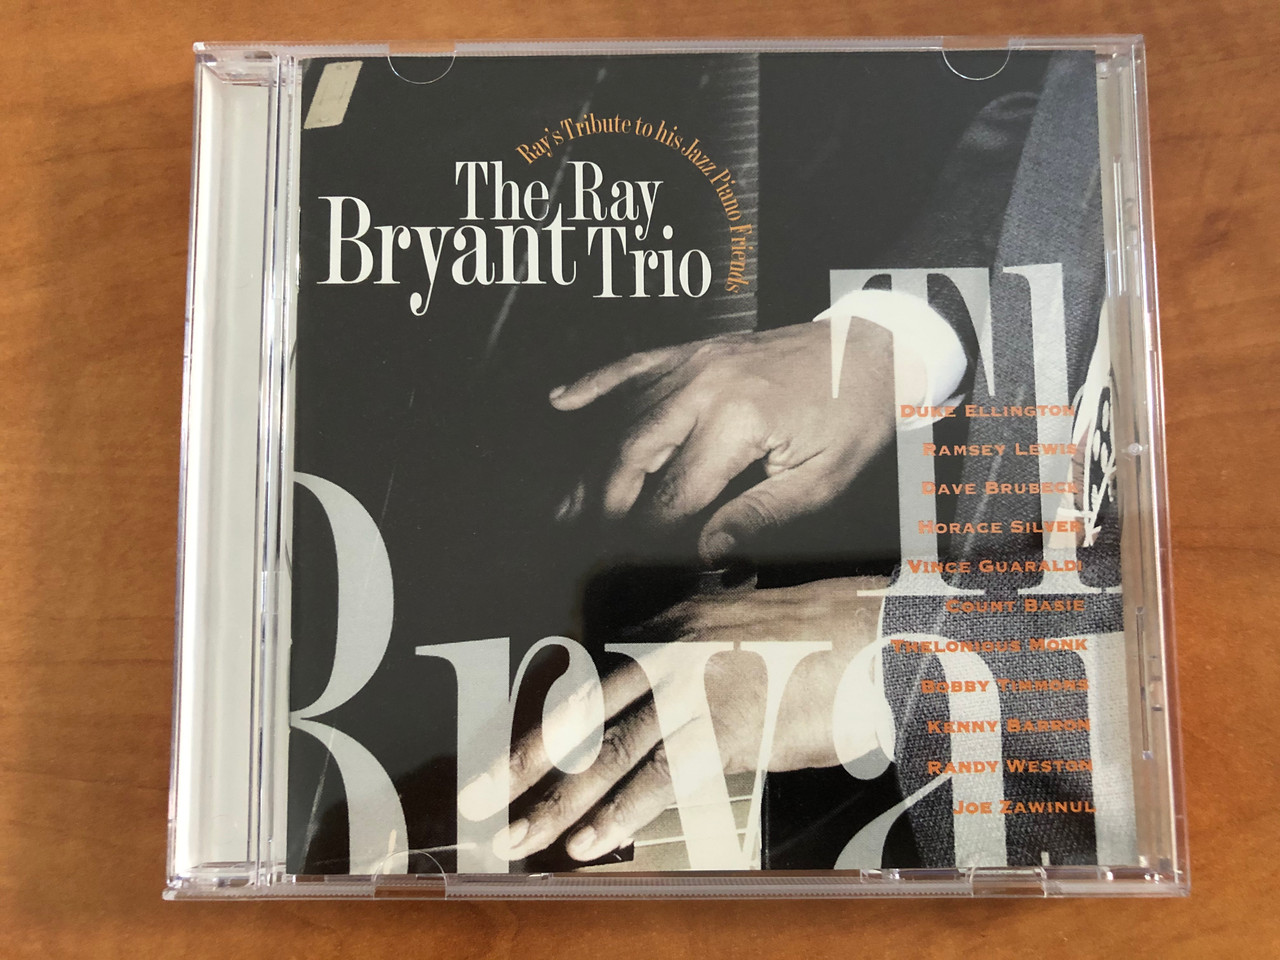 https://cdn10.bigcommerce.com/s-62bdpkt7pb/products/30677/images/181180/The_Ray_Bryant_Trio_Rays_Tribute_To_His_Jazz_Piano_Friends_Duke_Ellington_Ramsey_Lewis_Dave_Brubeck_Horace_Silver_Vince_Guaraldi_Count_Basic_Thelonious_Monk_Bobby_Timmons_Kenny_Bar_1__55989.1623653415.1280.1280.JPG?c=2&_ga=2.136436278.787544708.1623769862-1646000393.1623769862